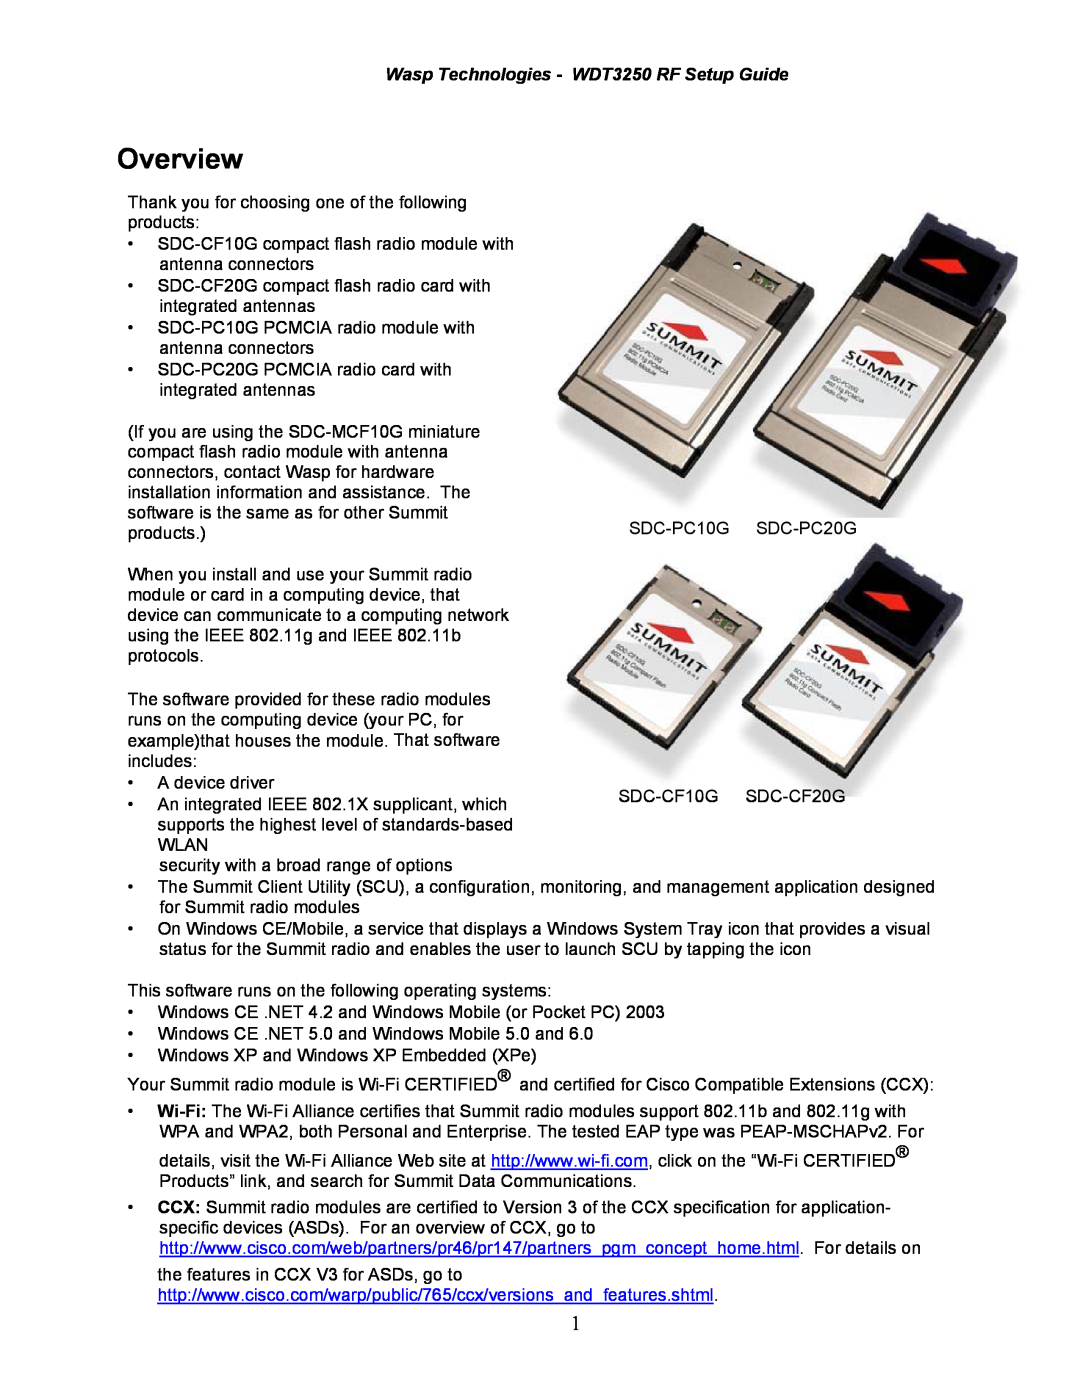 Wasp Bar Code setup guide Overview, Wasp Technologies - WDT3250 RF Setup Guide 